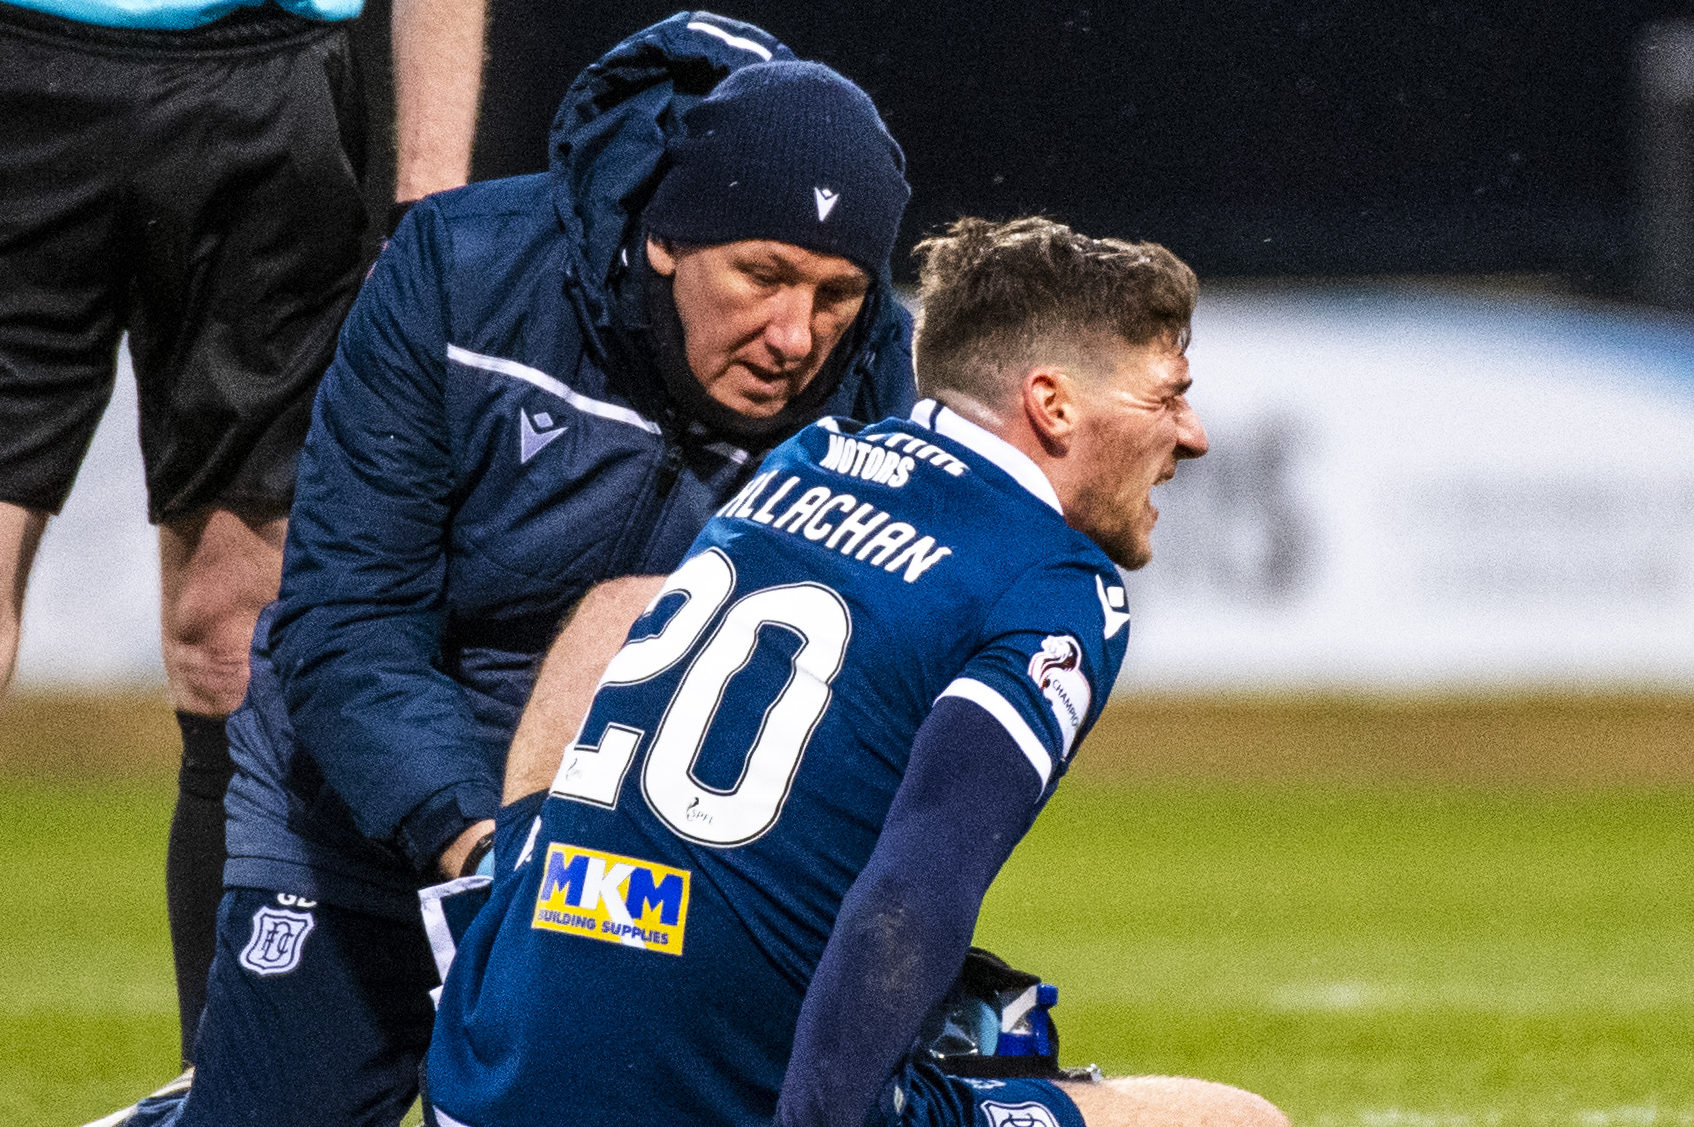 DUNDEE, SCOTLAND - FEBRUARY 08: Dundee's Ross Callachan goes down injured during the Ladbrokes Championship match between Dundee and Partick Thistle at the Kilmac Stadium at Dens Park on February 08, 2020 in Dundee, Scotland. (Photo by Euan Cherry / SNS Group)